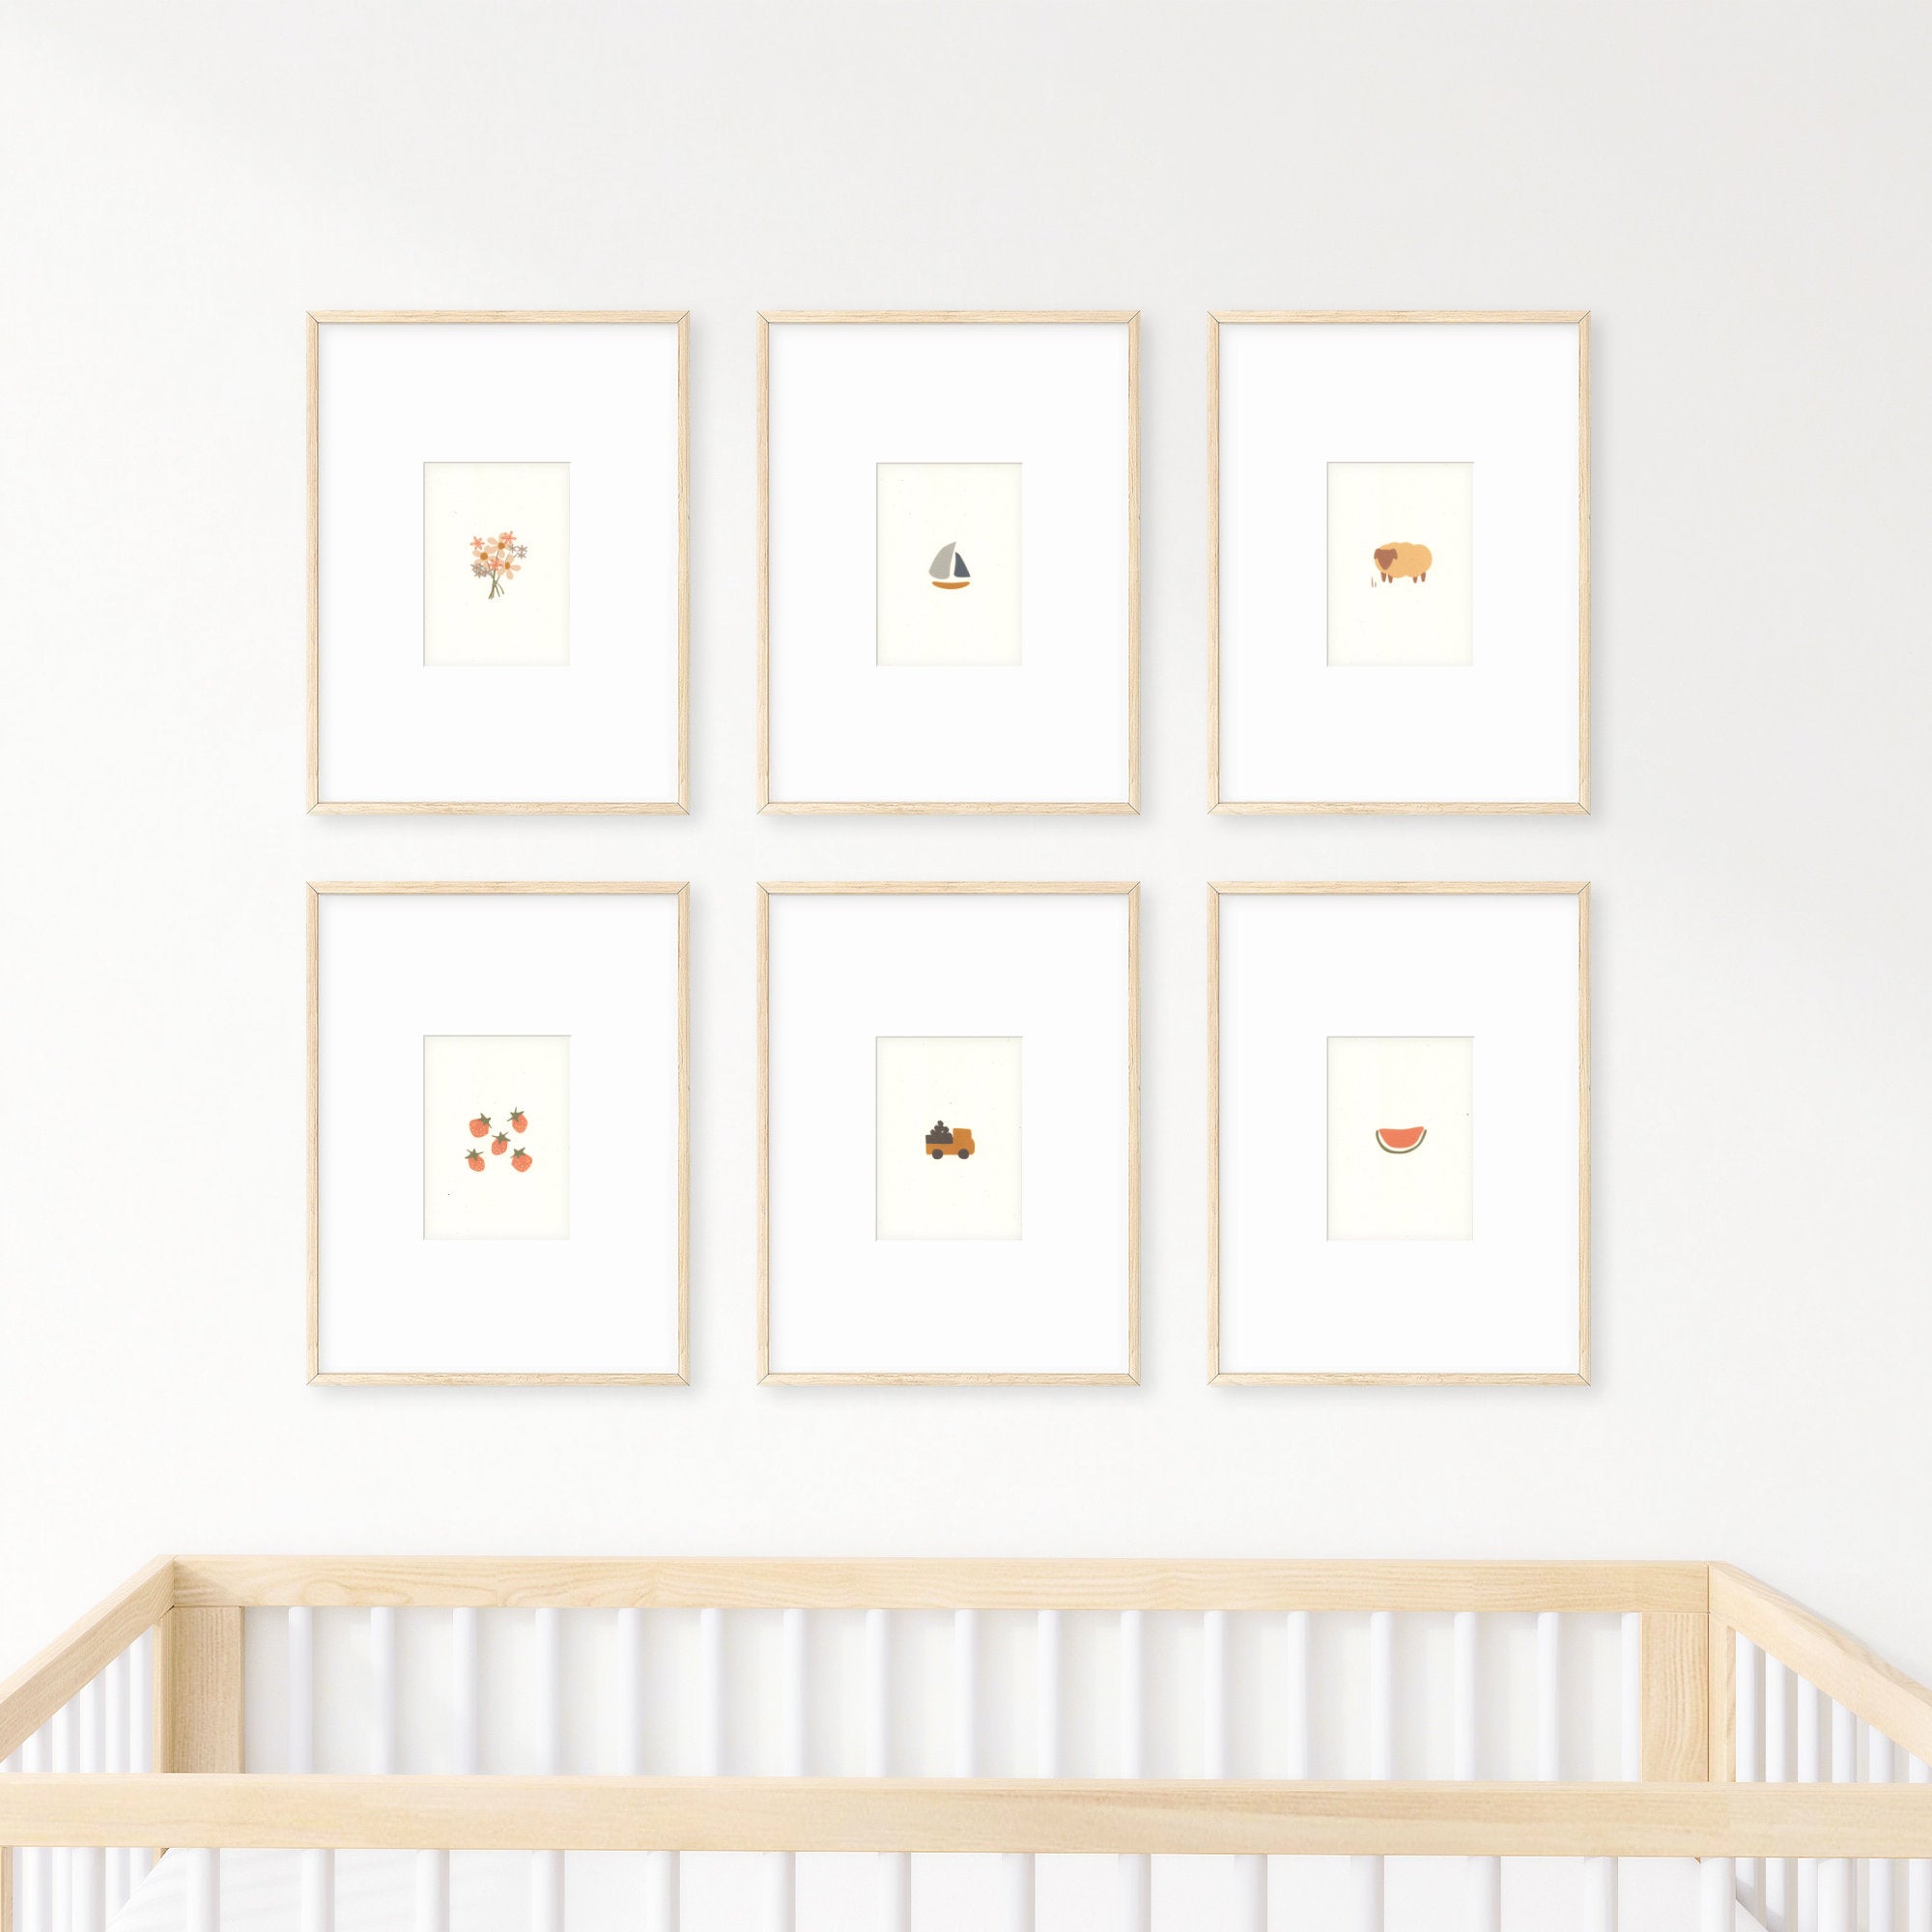 Six cute nursery prints framed and hanging on a wall over a baby&#39;s crib. The prints show: a bouquet of flowers, a small sailboat, a brown sheep, five strawberries, a small dump truck carrying boulders, and a slice of watermelon.